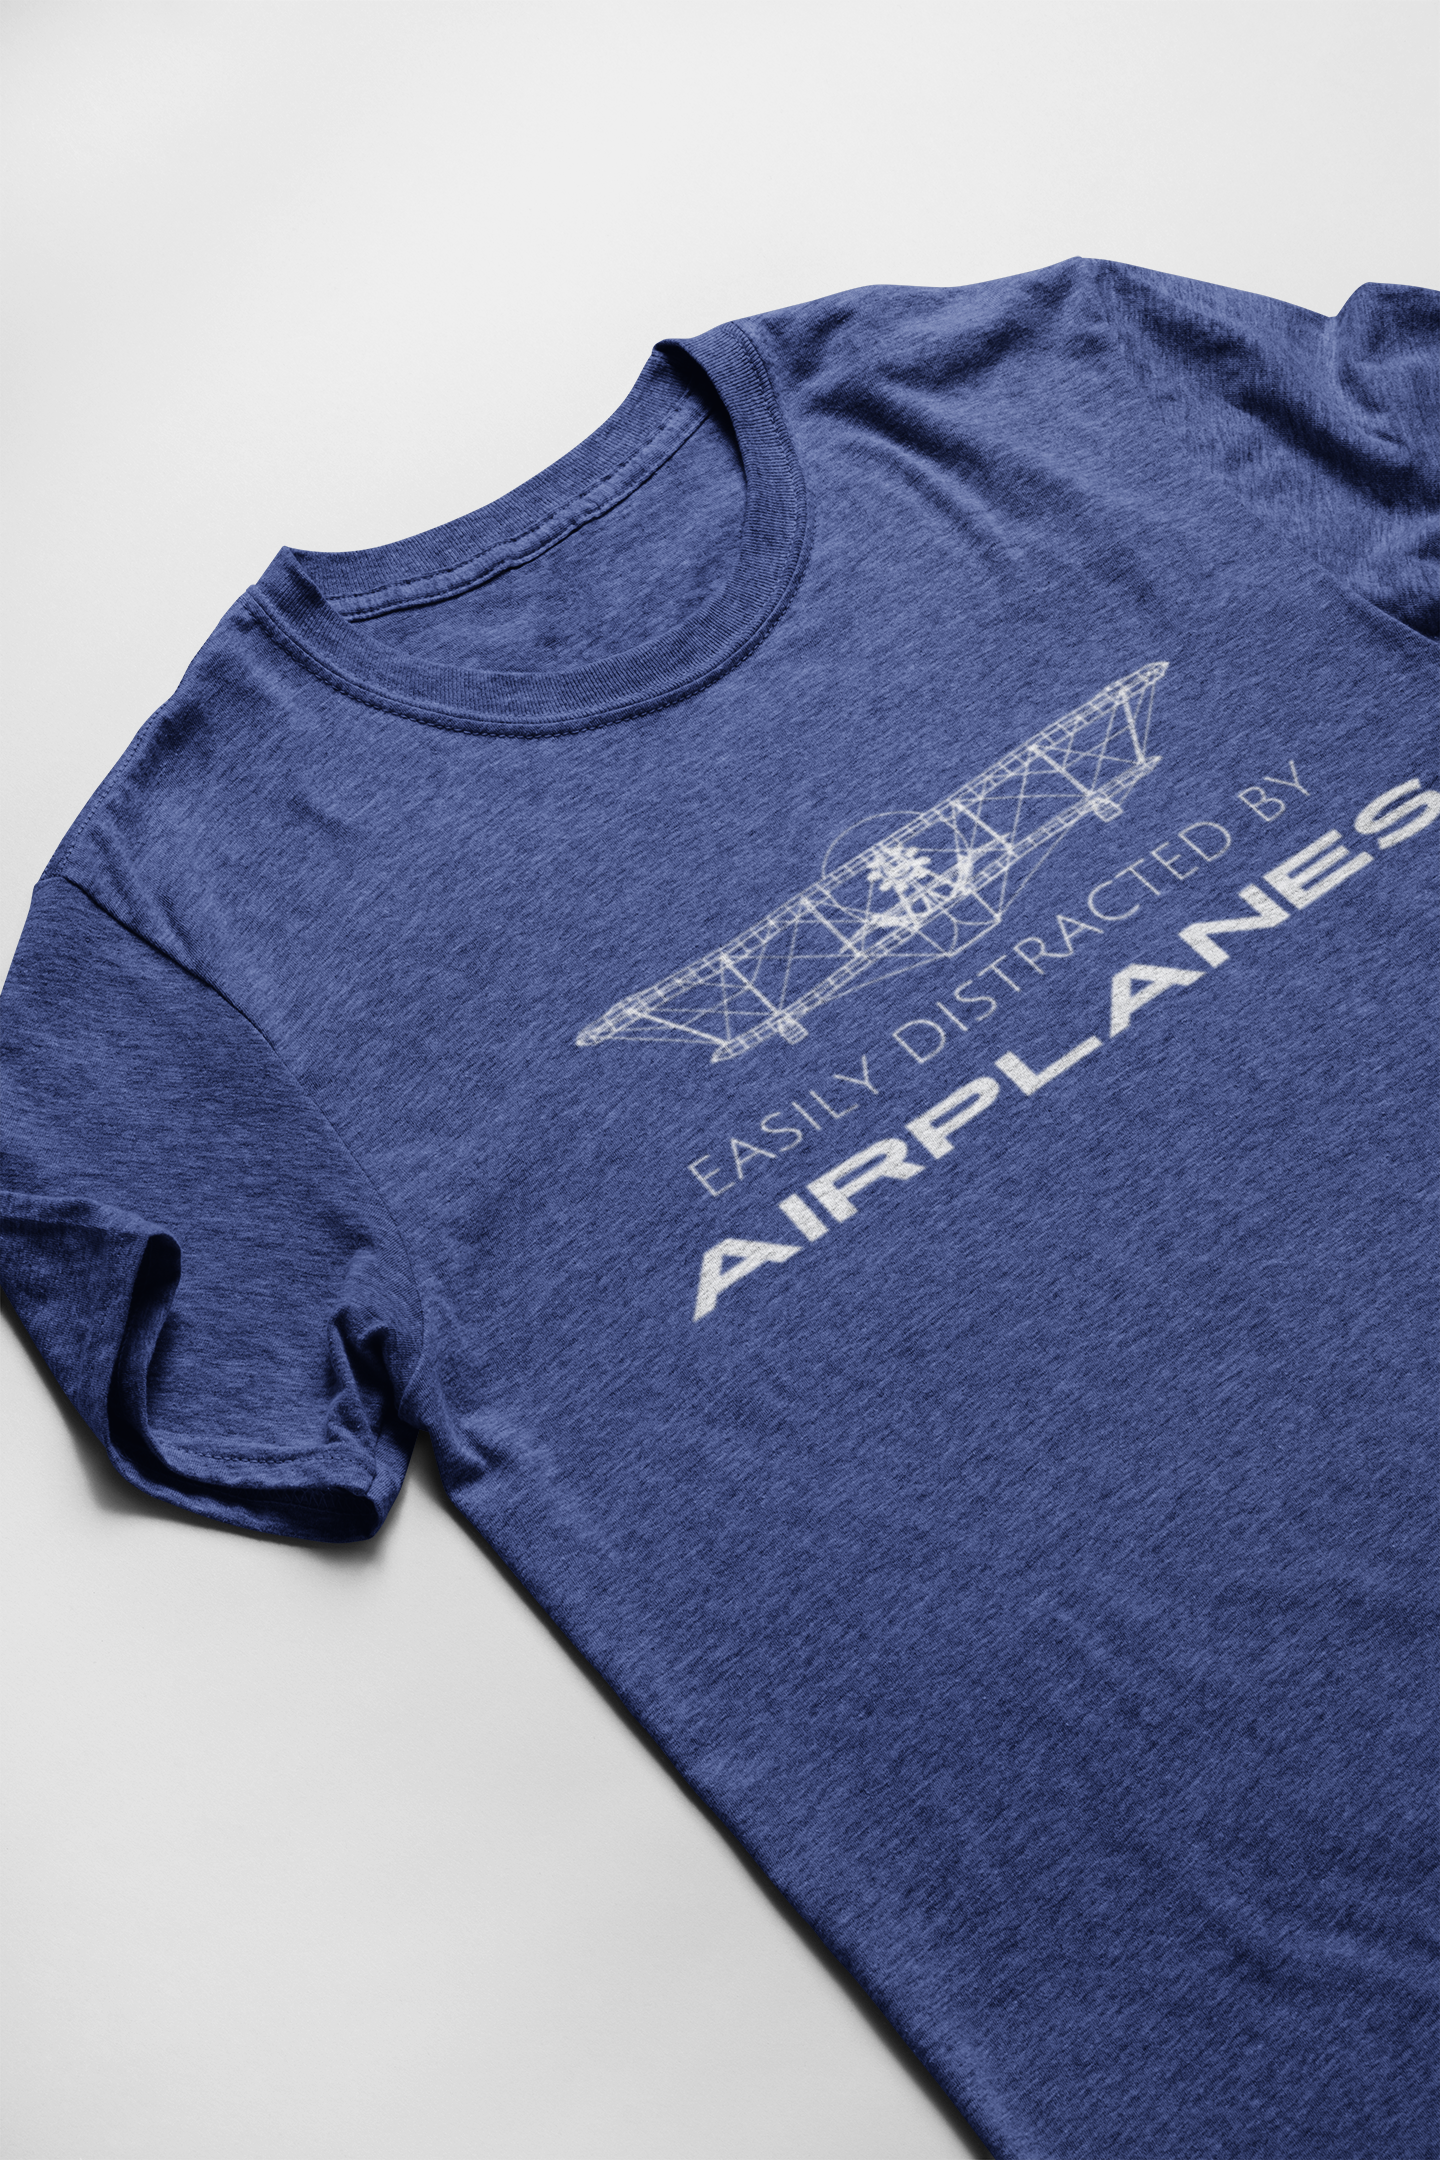 blue aviation tshirt that says easily distracted by airplanes with an airplane graphic on it